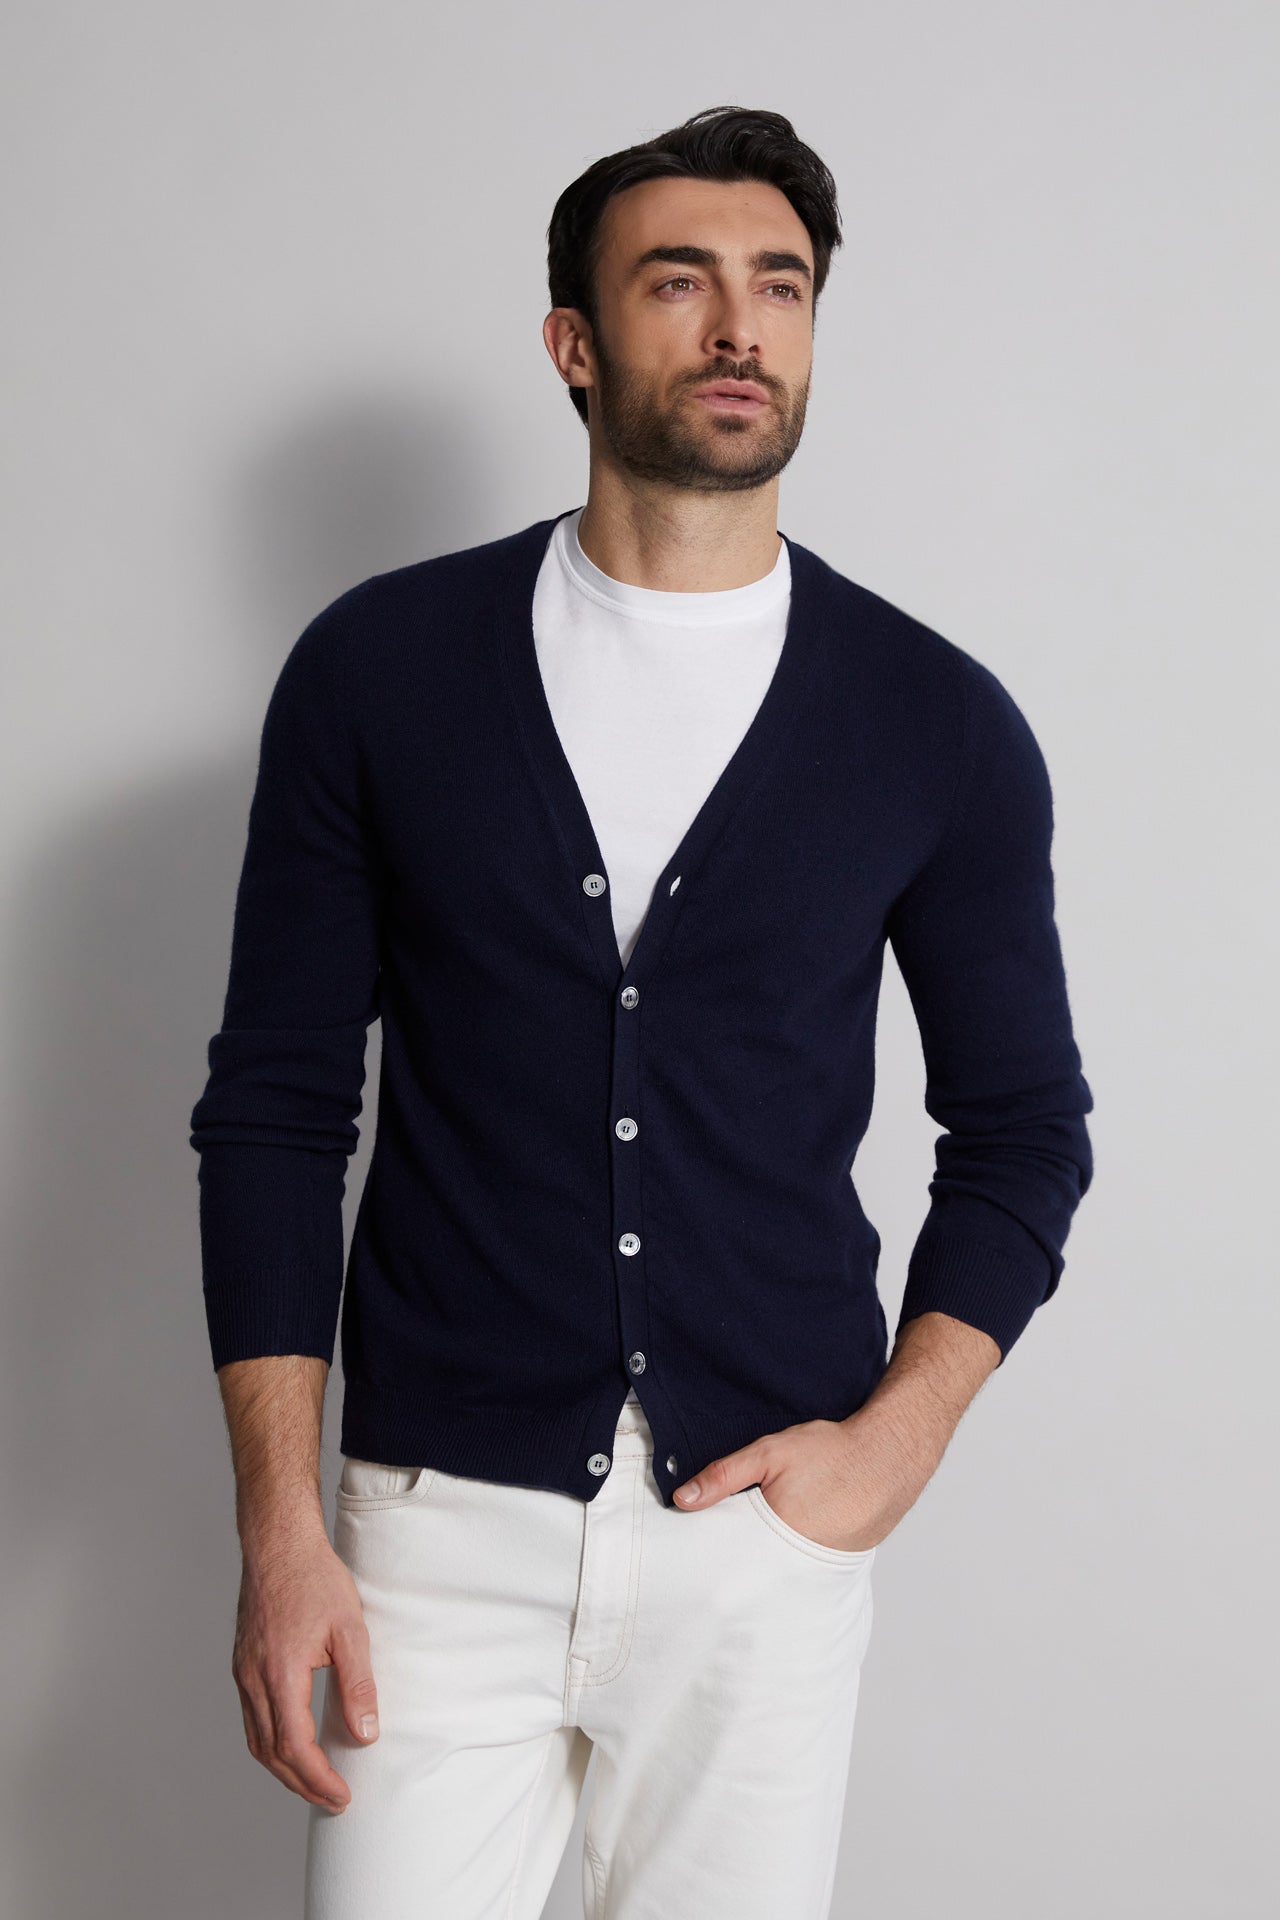 Cashmere cardigan in iconic colors